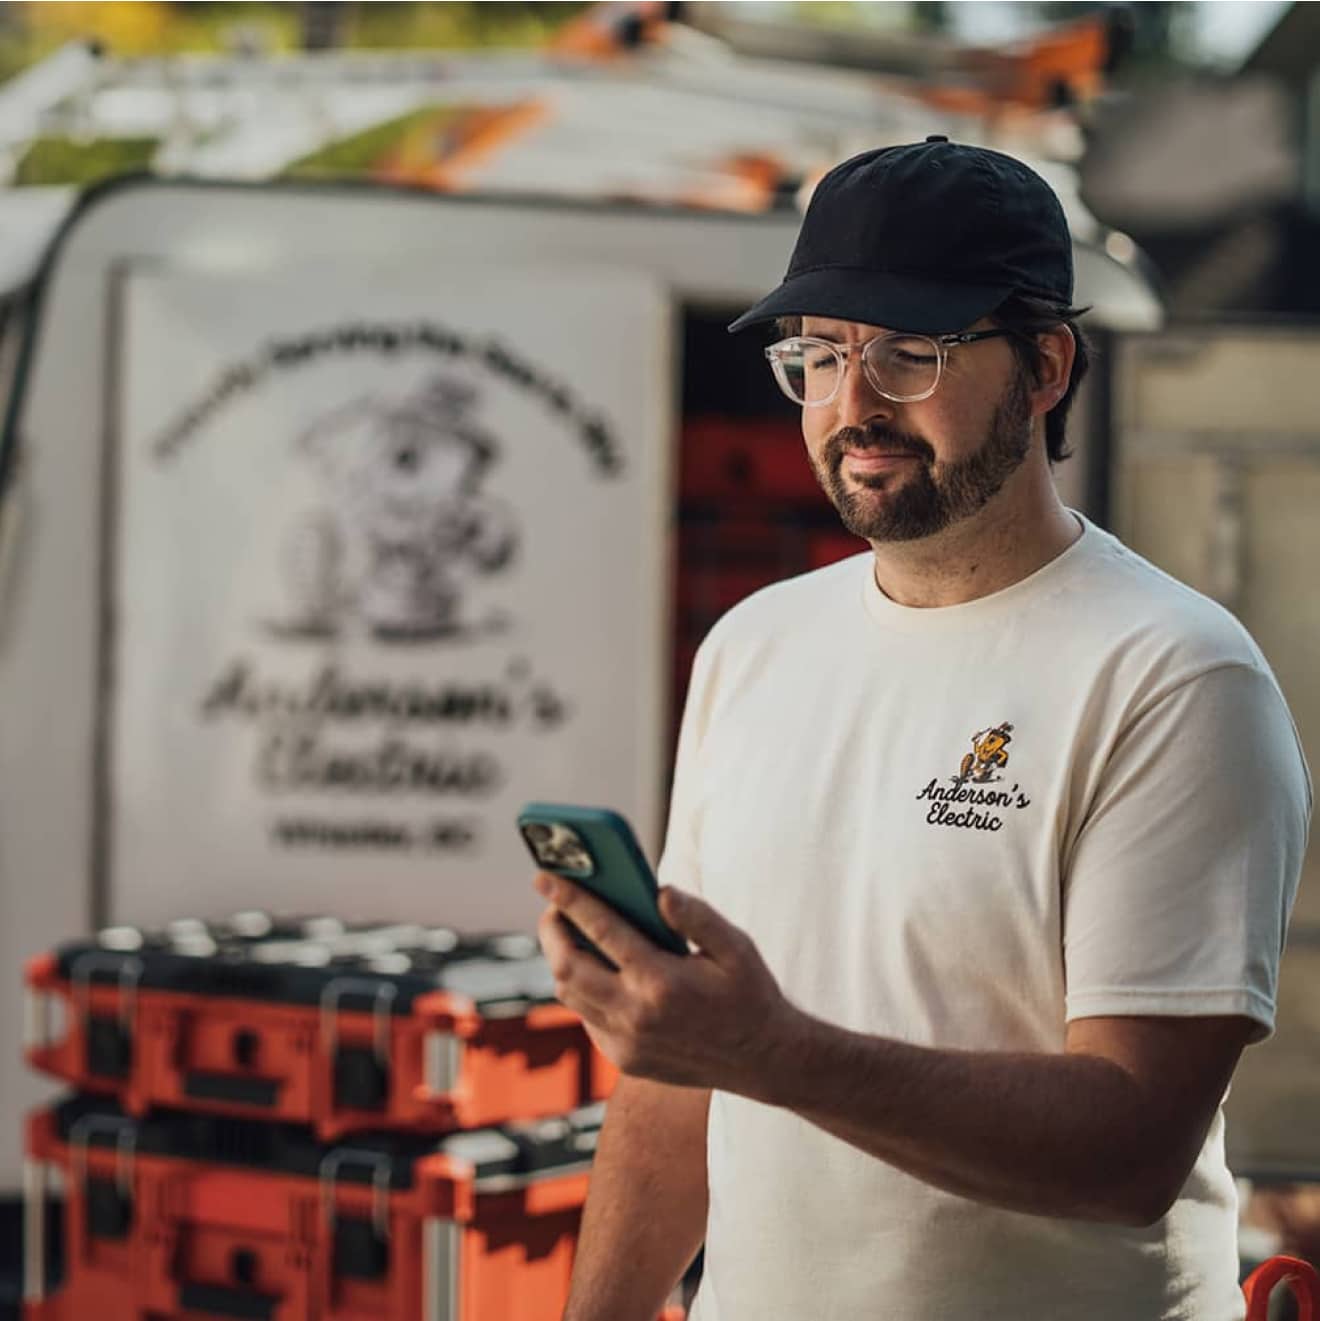 An electric company contractor standing in front of an equipment trailer looking at his mobile phone.